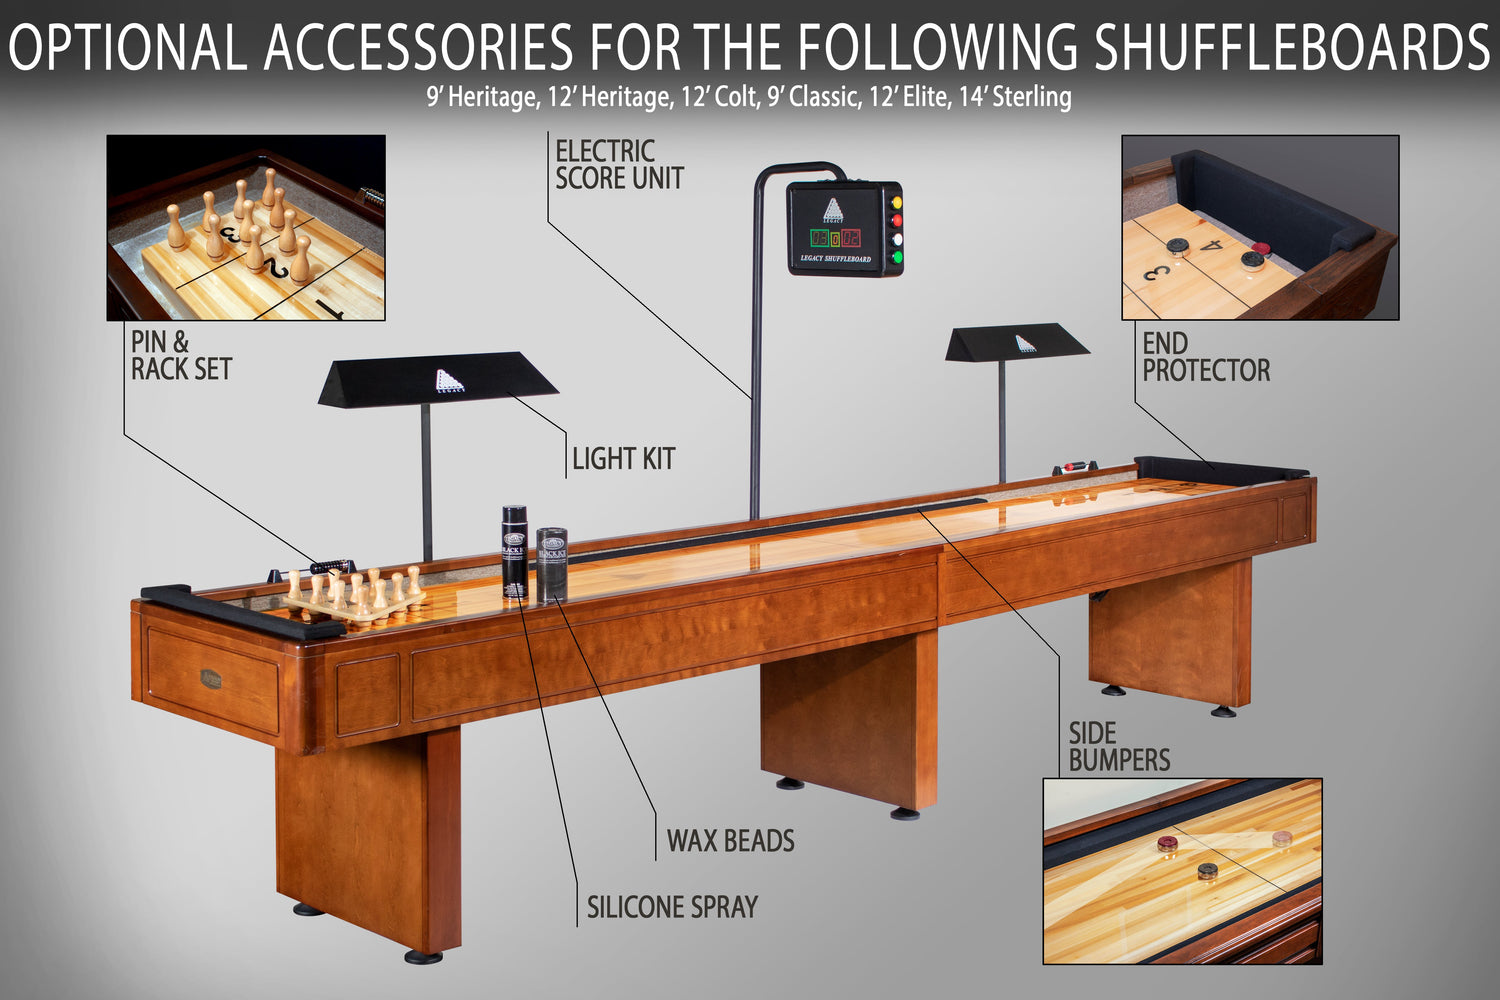 Legacy Billiards 14 Ft Collins Shuffleboard Optional Accessories